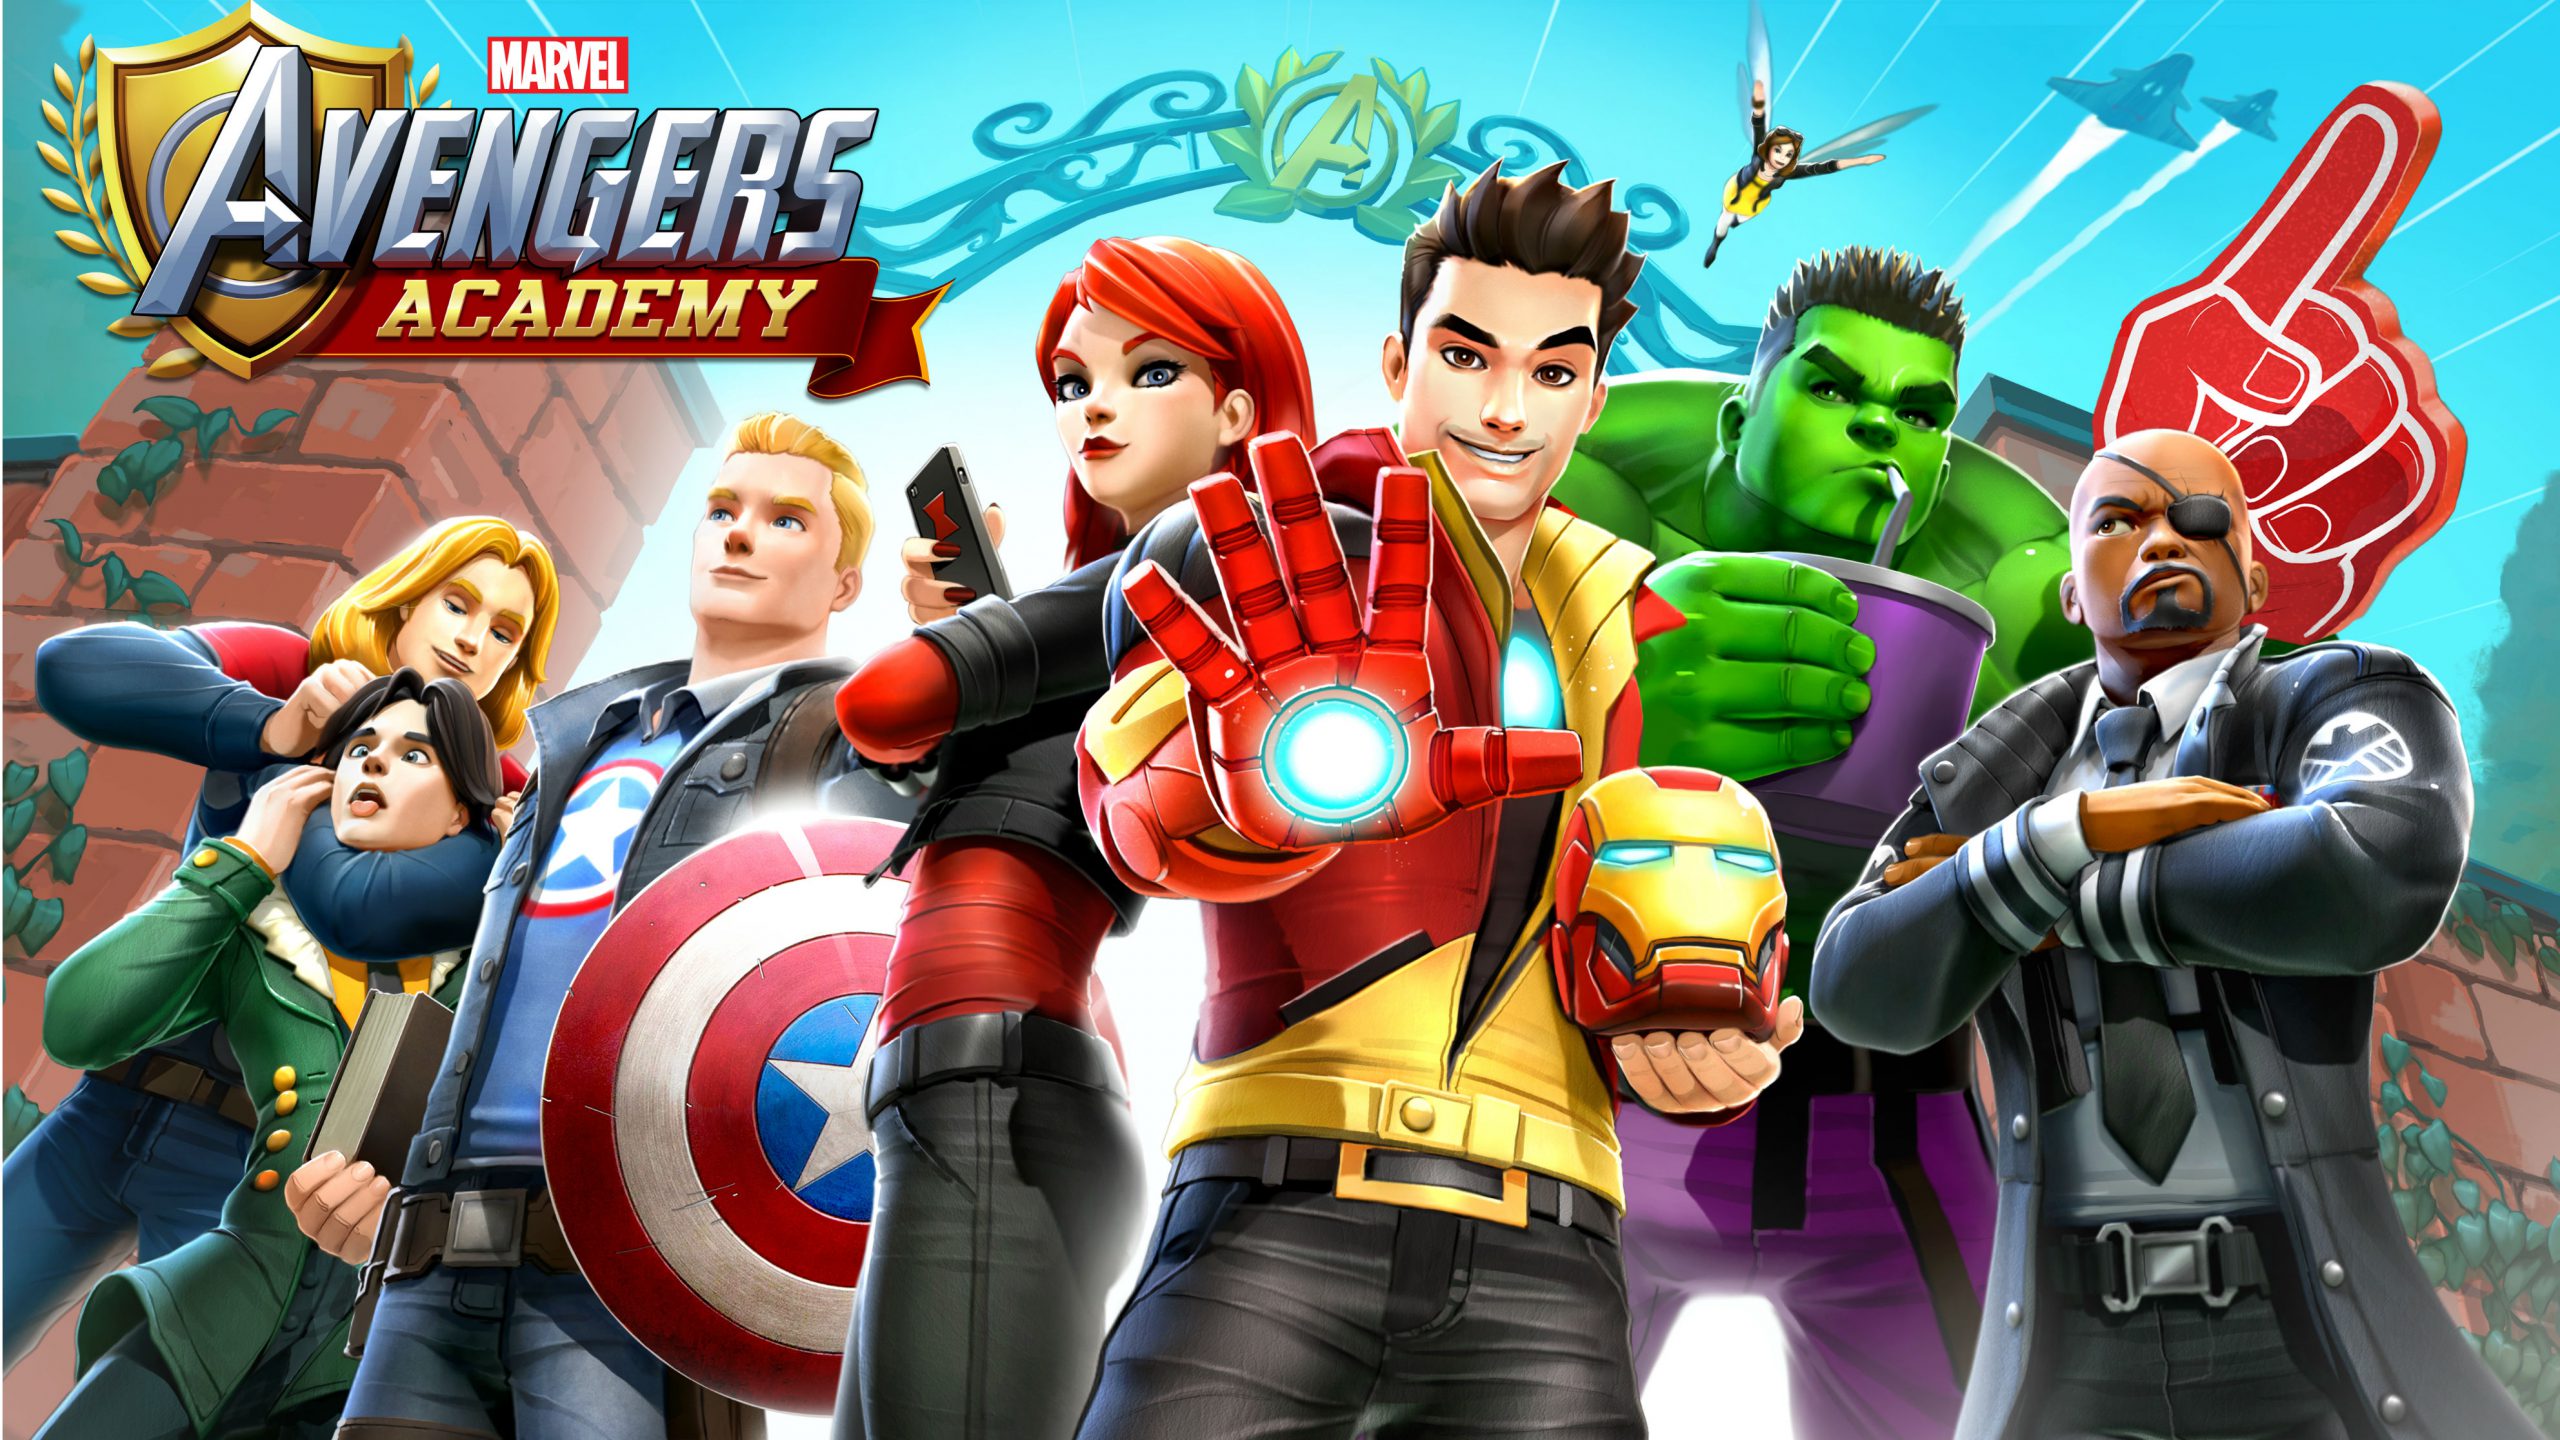 Marvel Avengers Academy Review: Teenagers, Assemble!